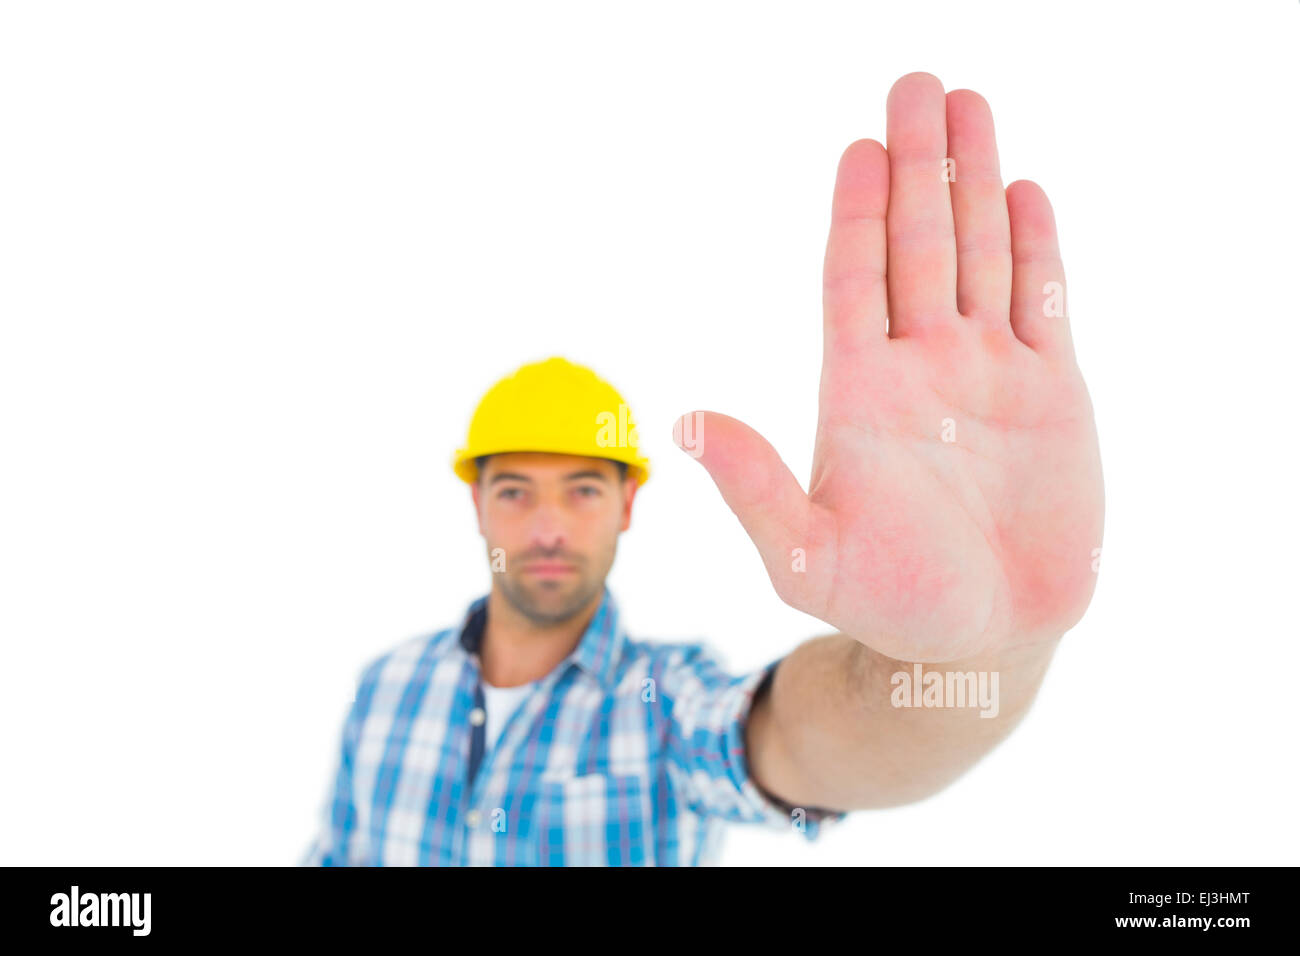 Confident manual worker gesturing stop sign Stock Photo